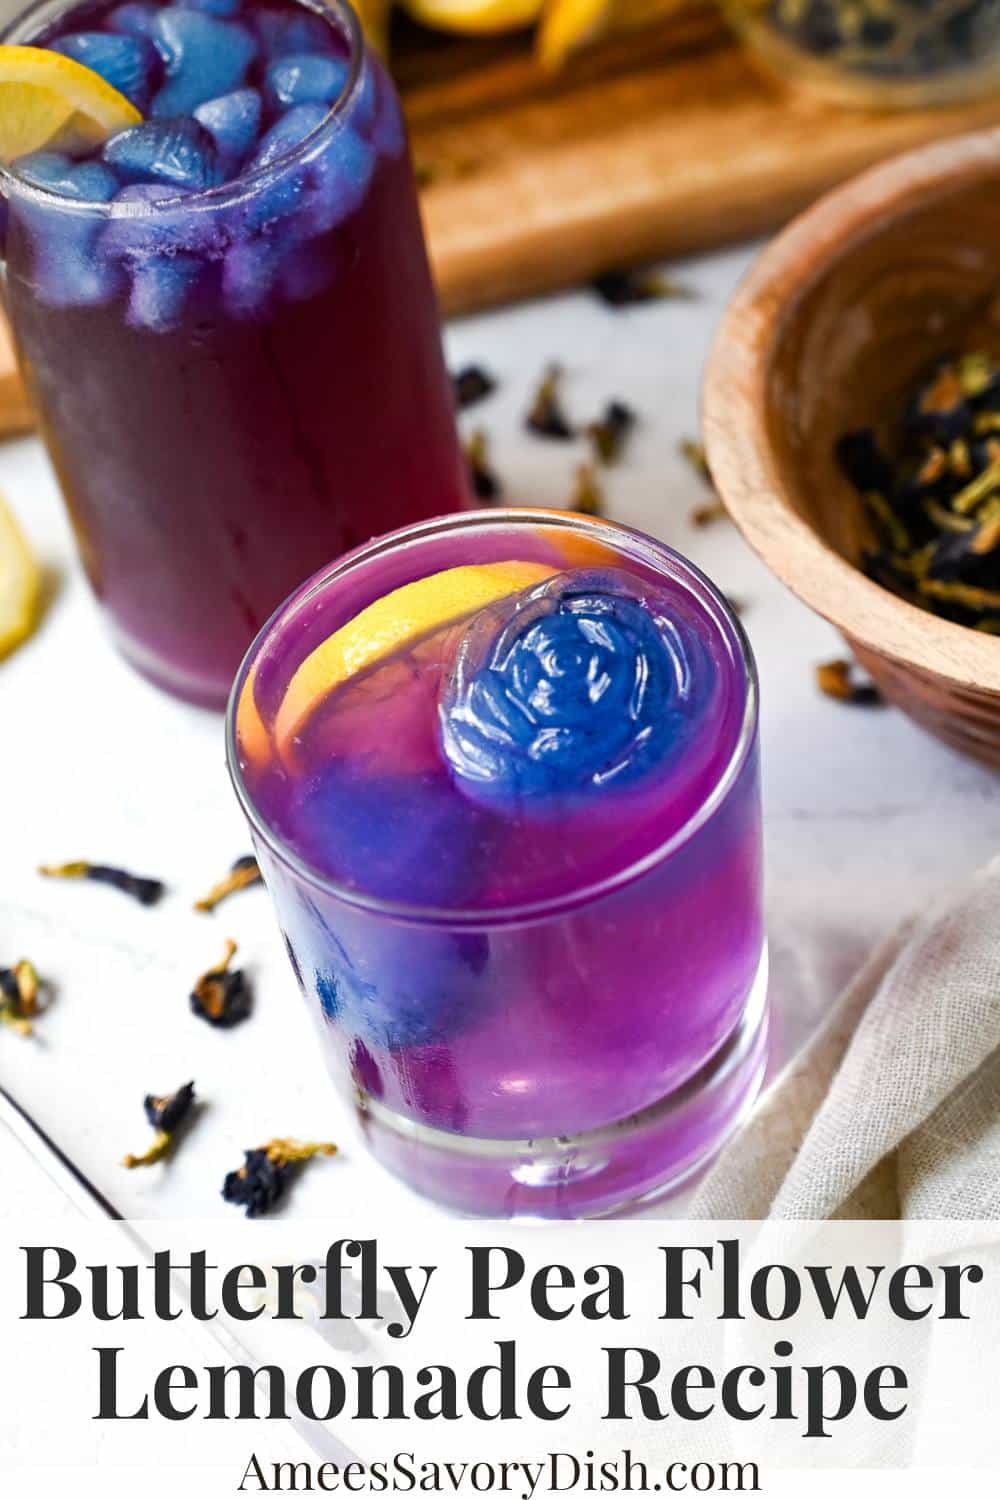 A delicious, refreshing, and visually stunning beverage made with freshly squeezed lemons, natural sweetener, and dried butterfly pea flower blossoms. via @Ameessavorydish